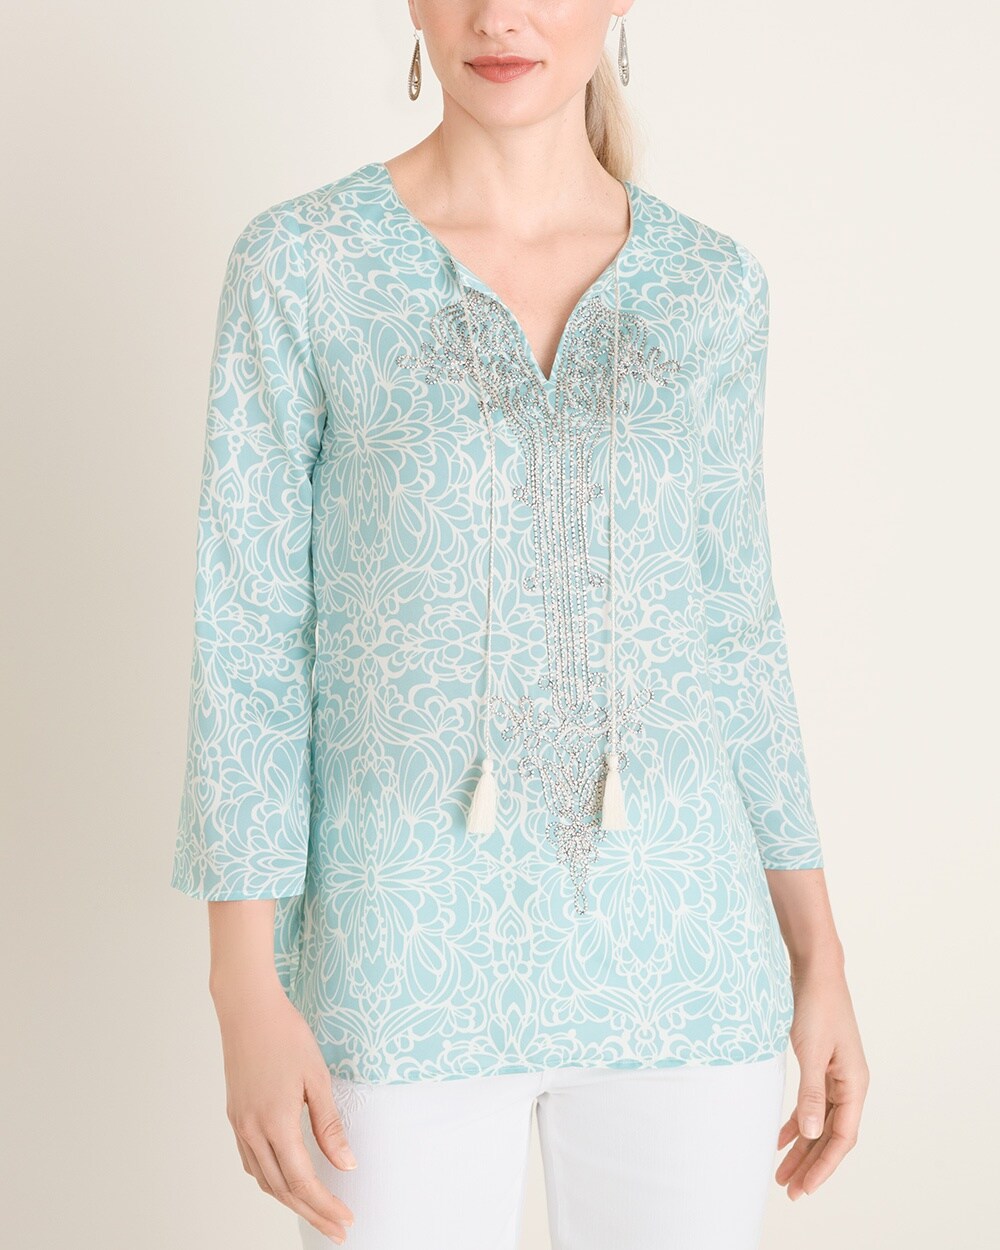 Embellished Mirrored Scroll-Print Blouse